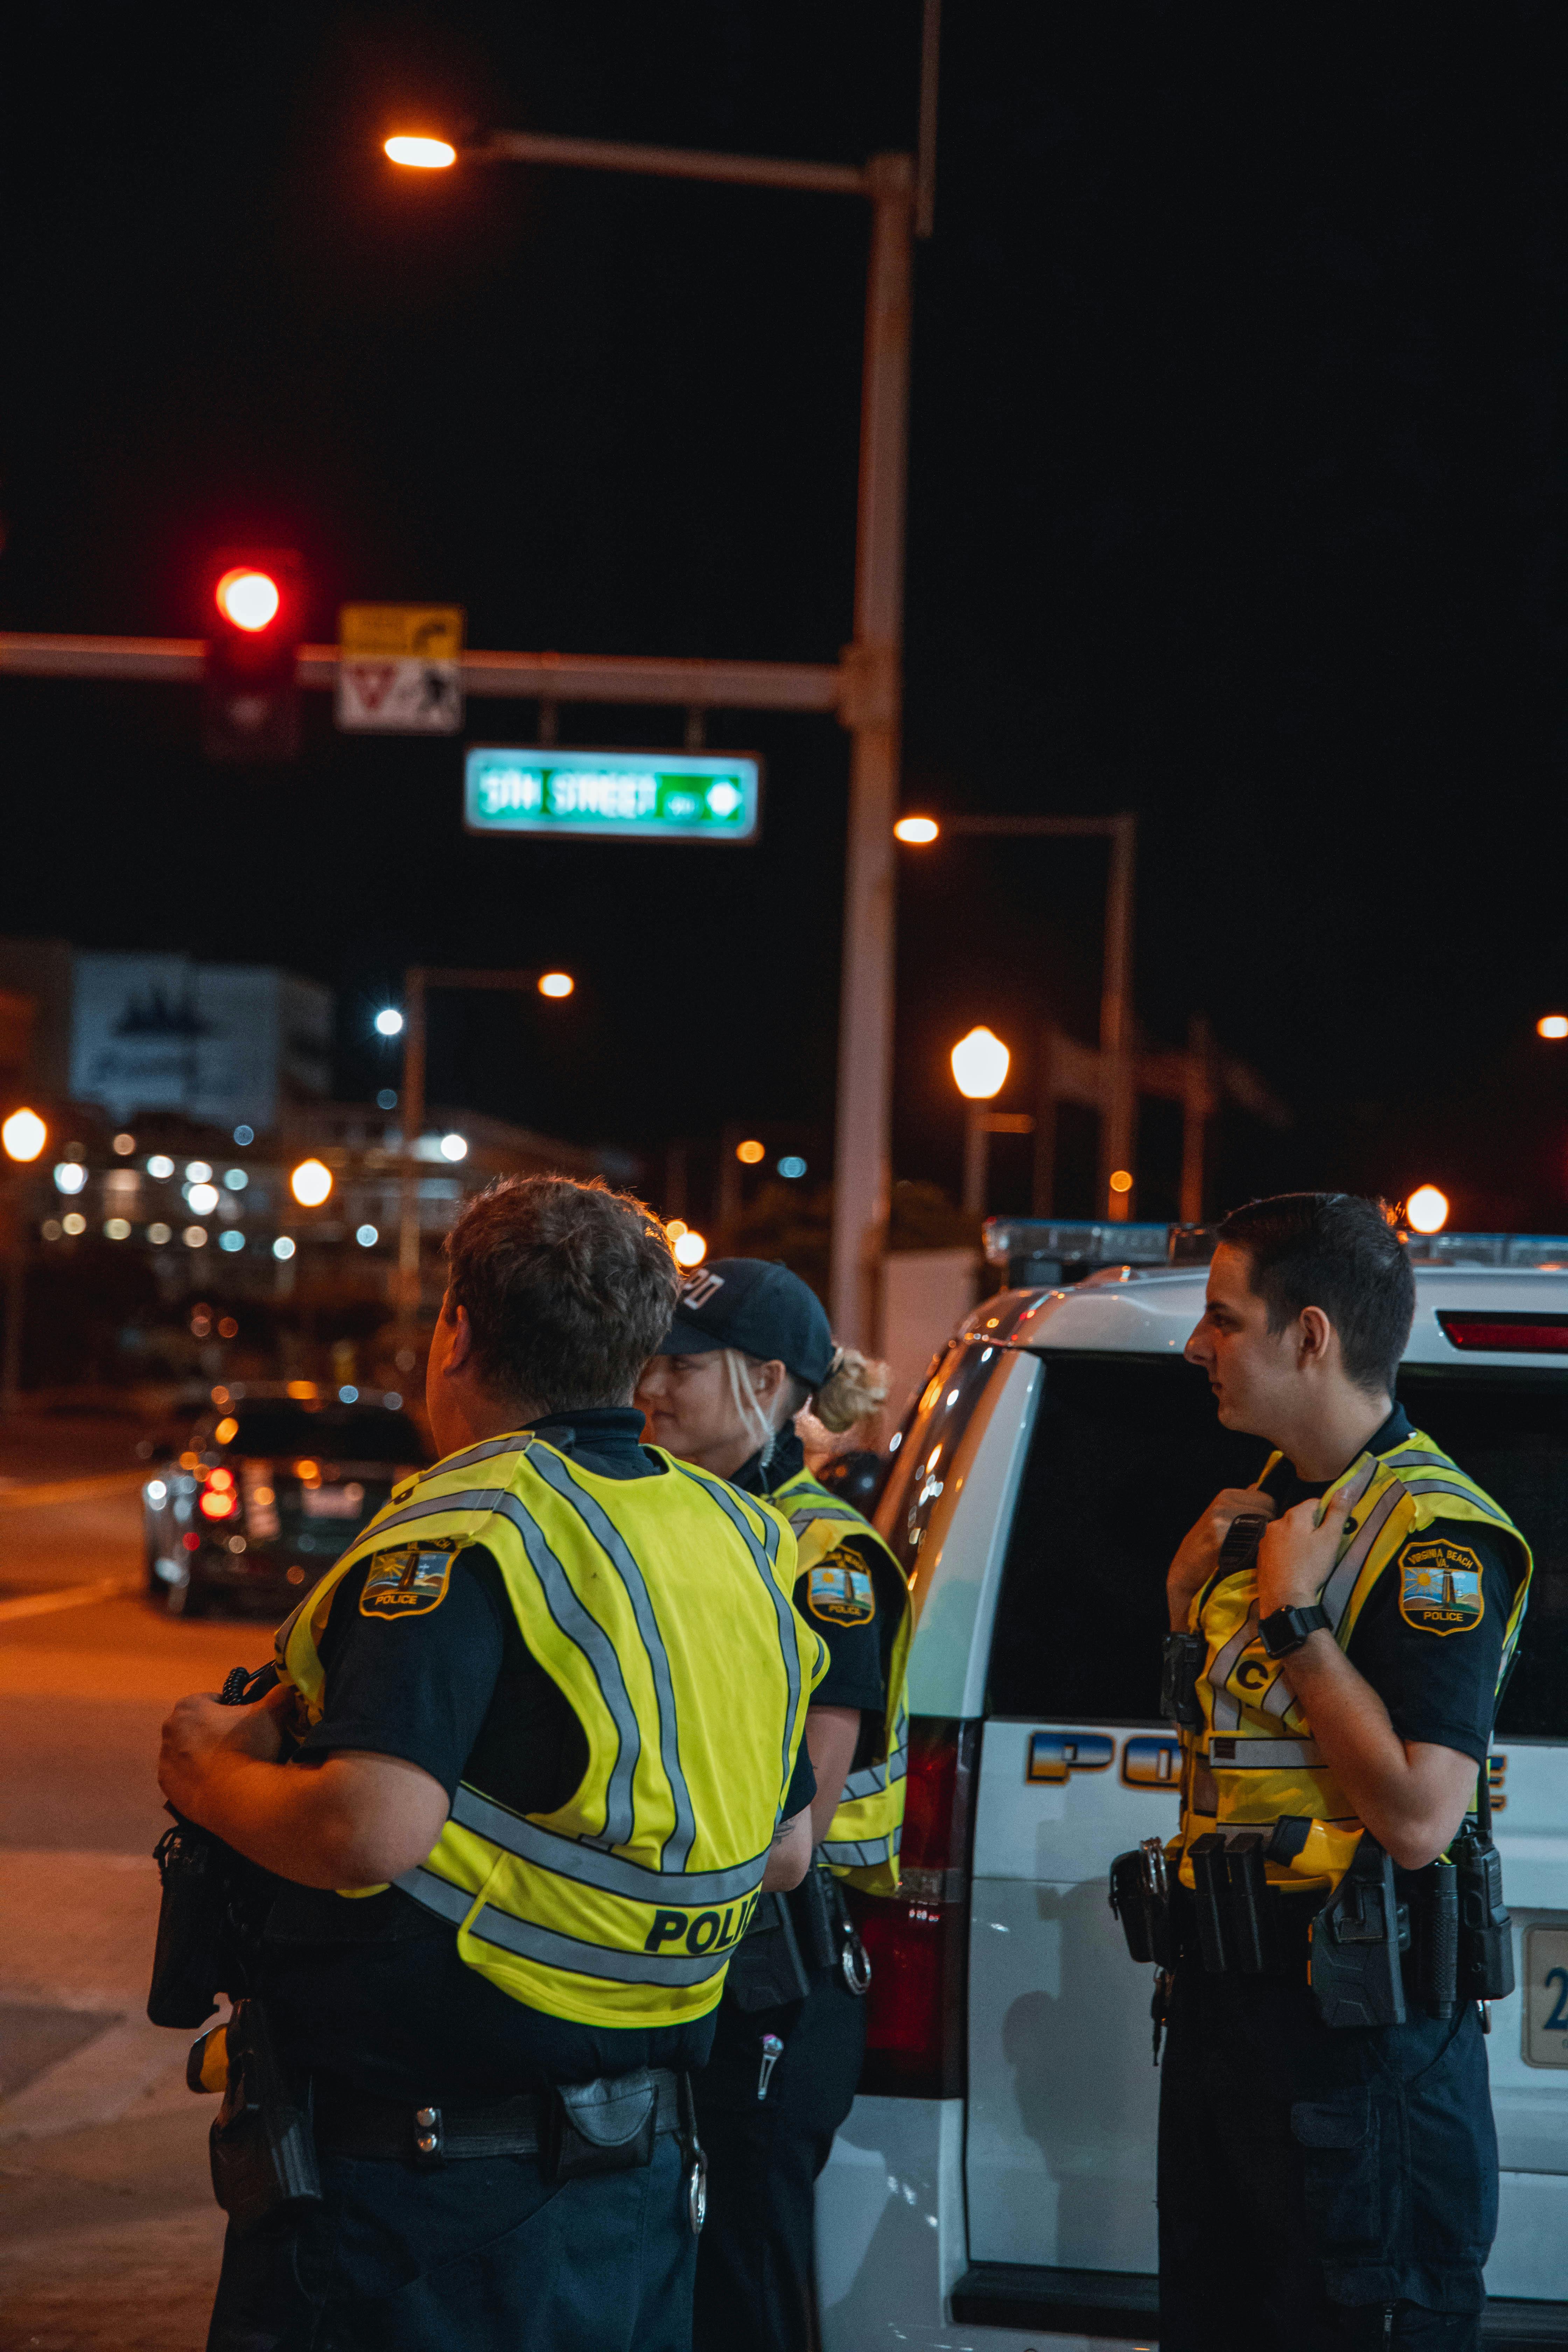 DUI Saturation Patrol Planed For Palm Beach County - Get Ready, Safety First!